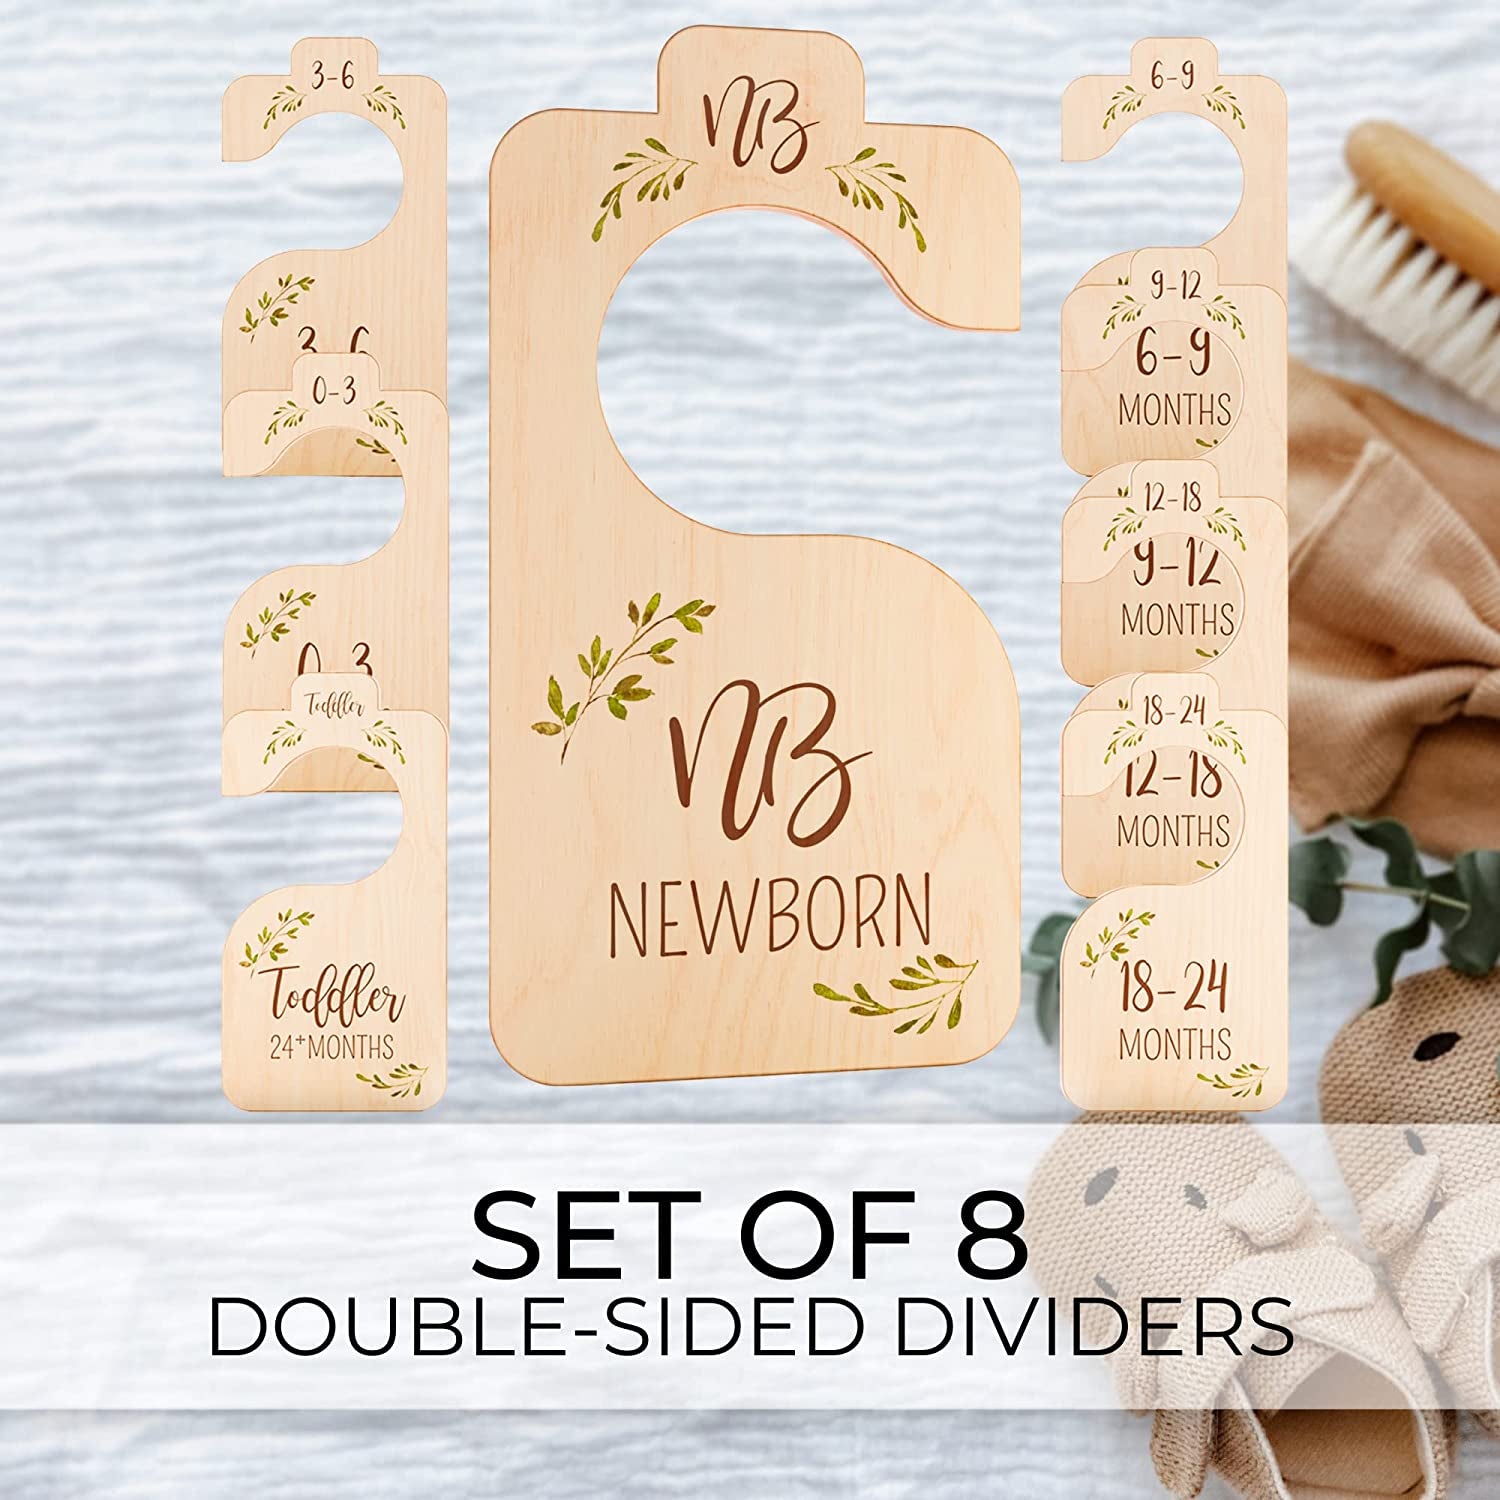 Beautiful Wooden Baby Closet Dividers for Clothes - Double-Sided Organizer from Newborn to 24 Months - Adorable Nursery Decor Hanger Dividers Easily Organize Your Little Baby Girls or Boys Room